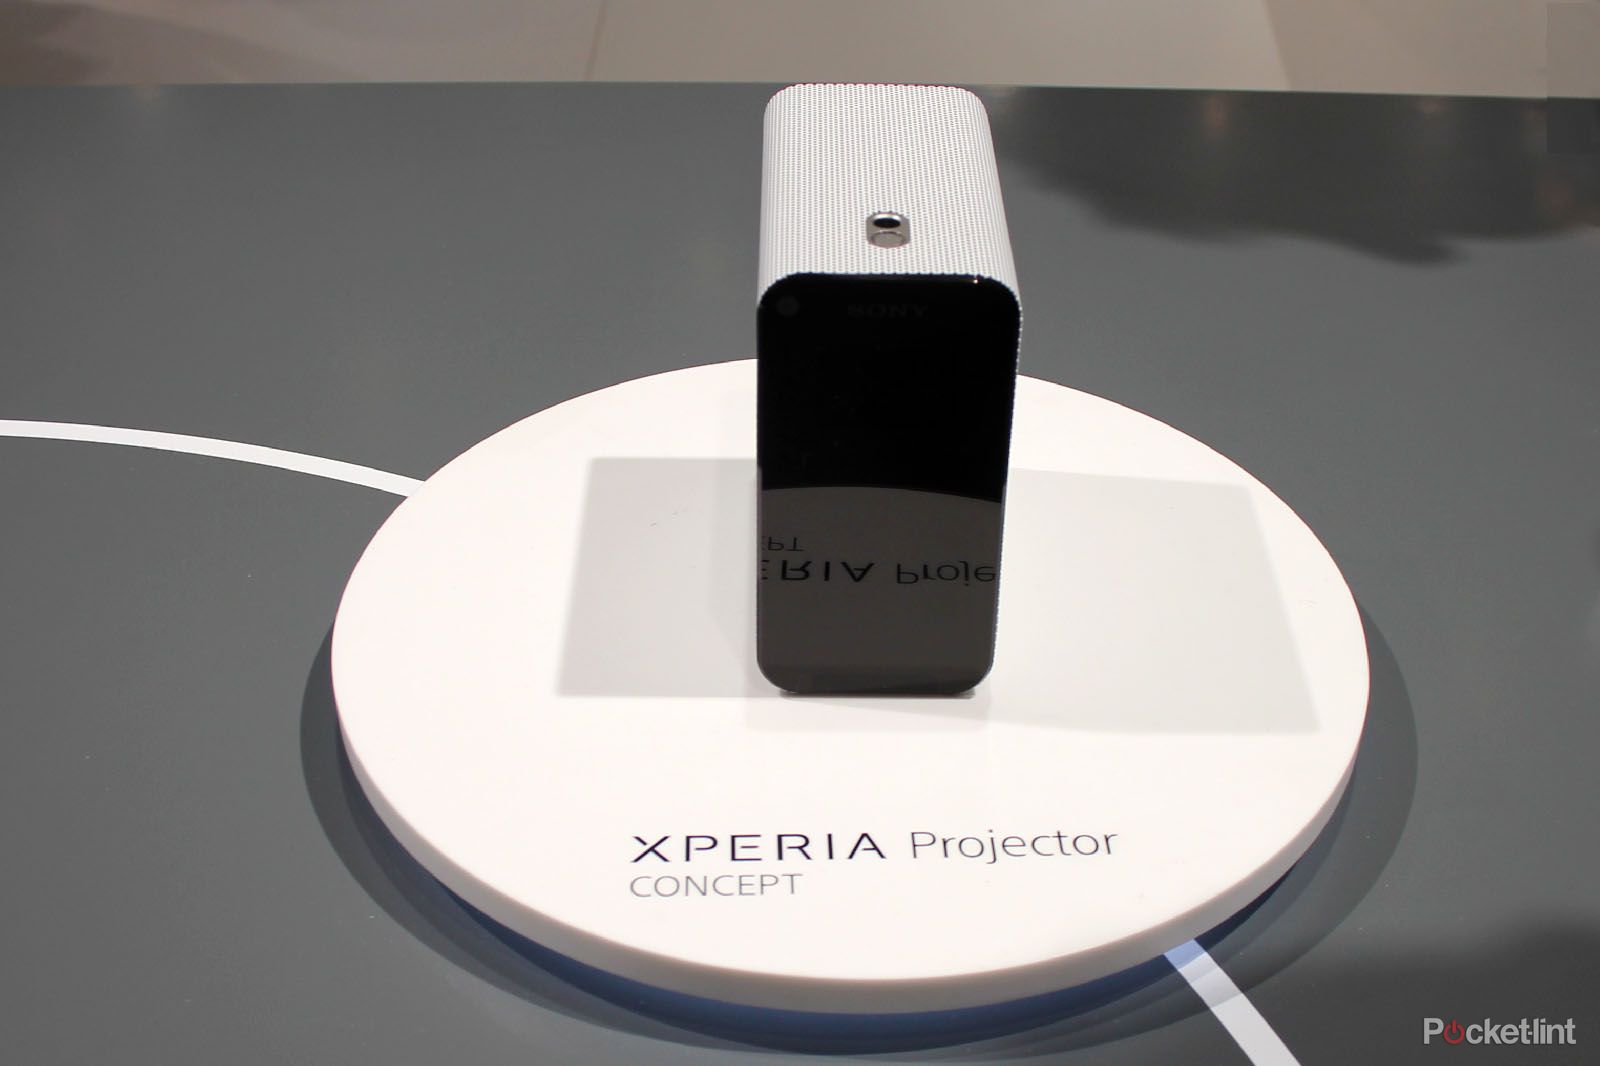 sony xperia eye projector agent concept visions of a connected future image 2